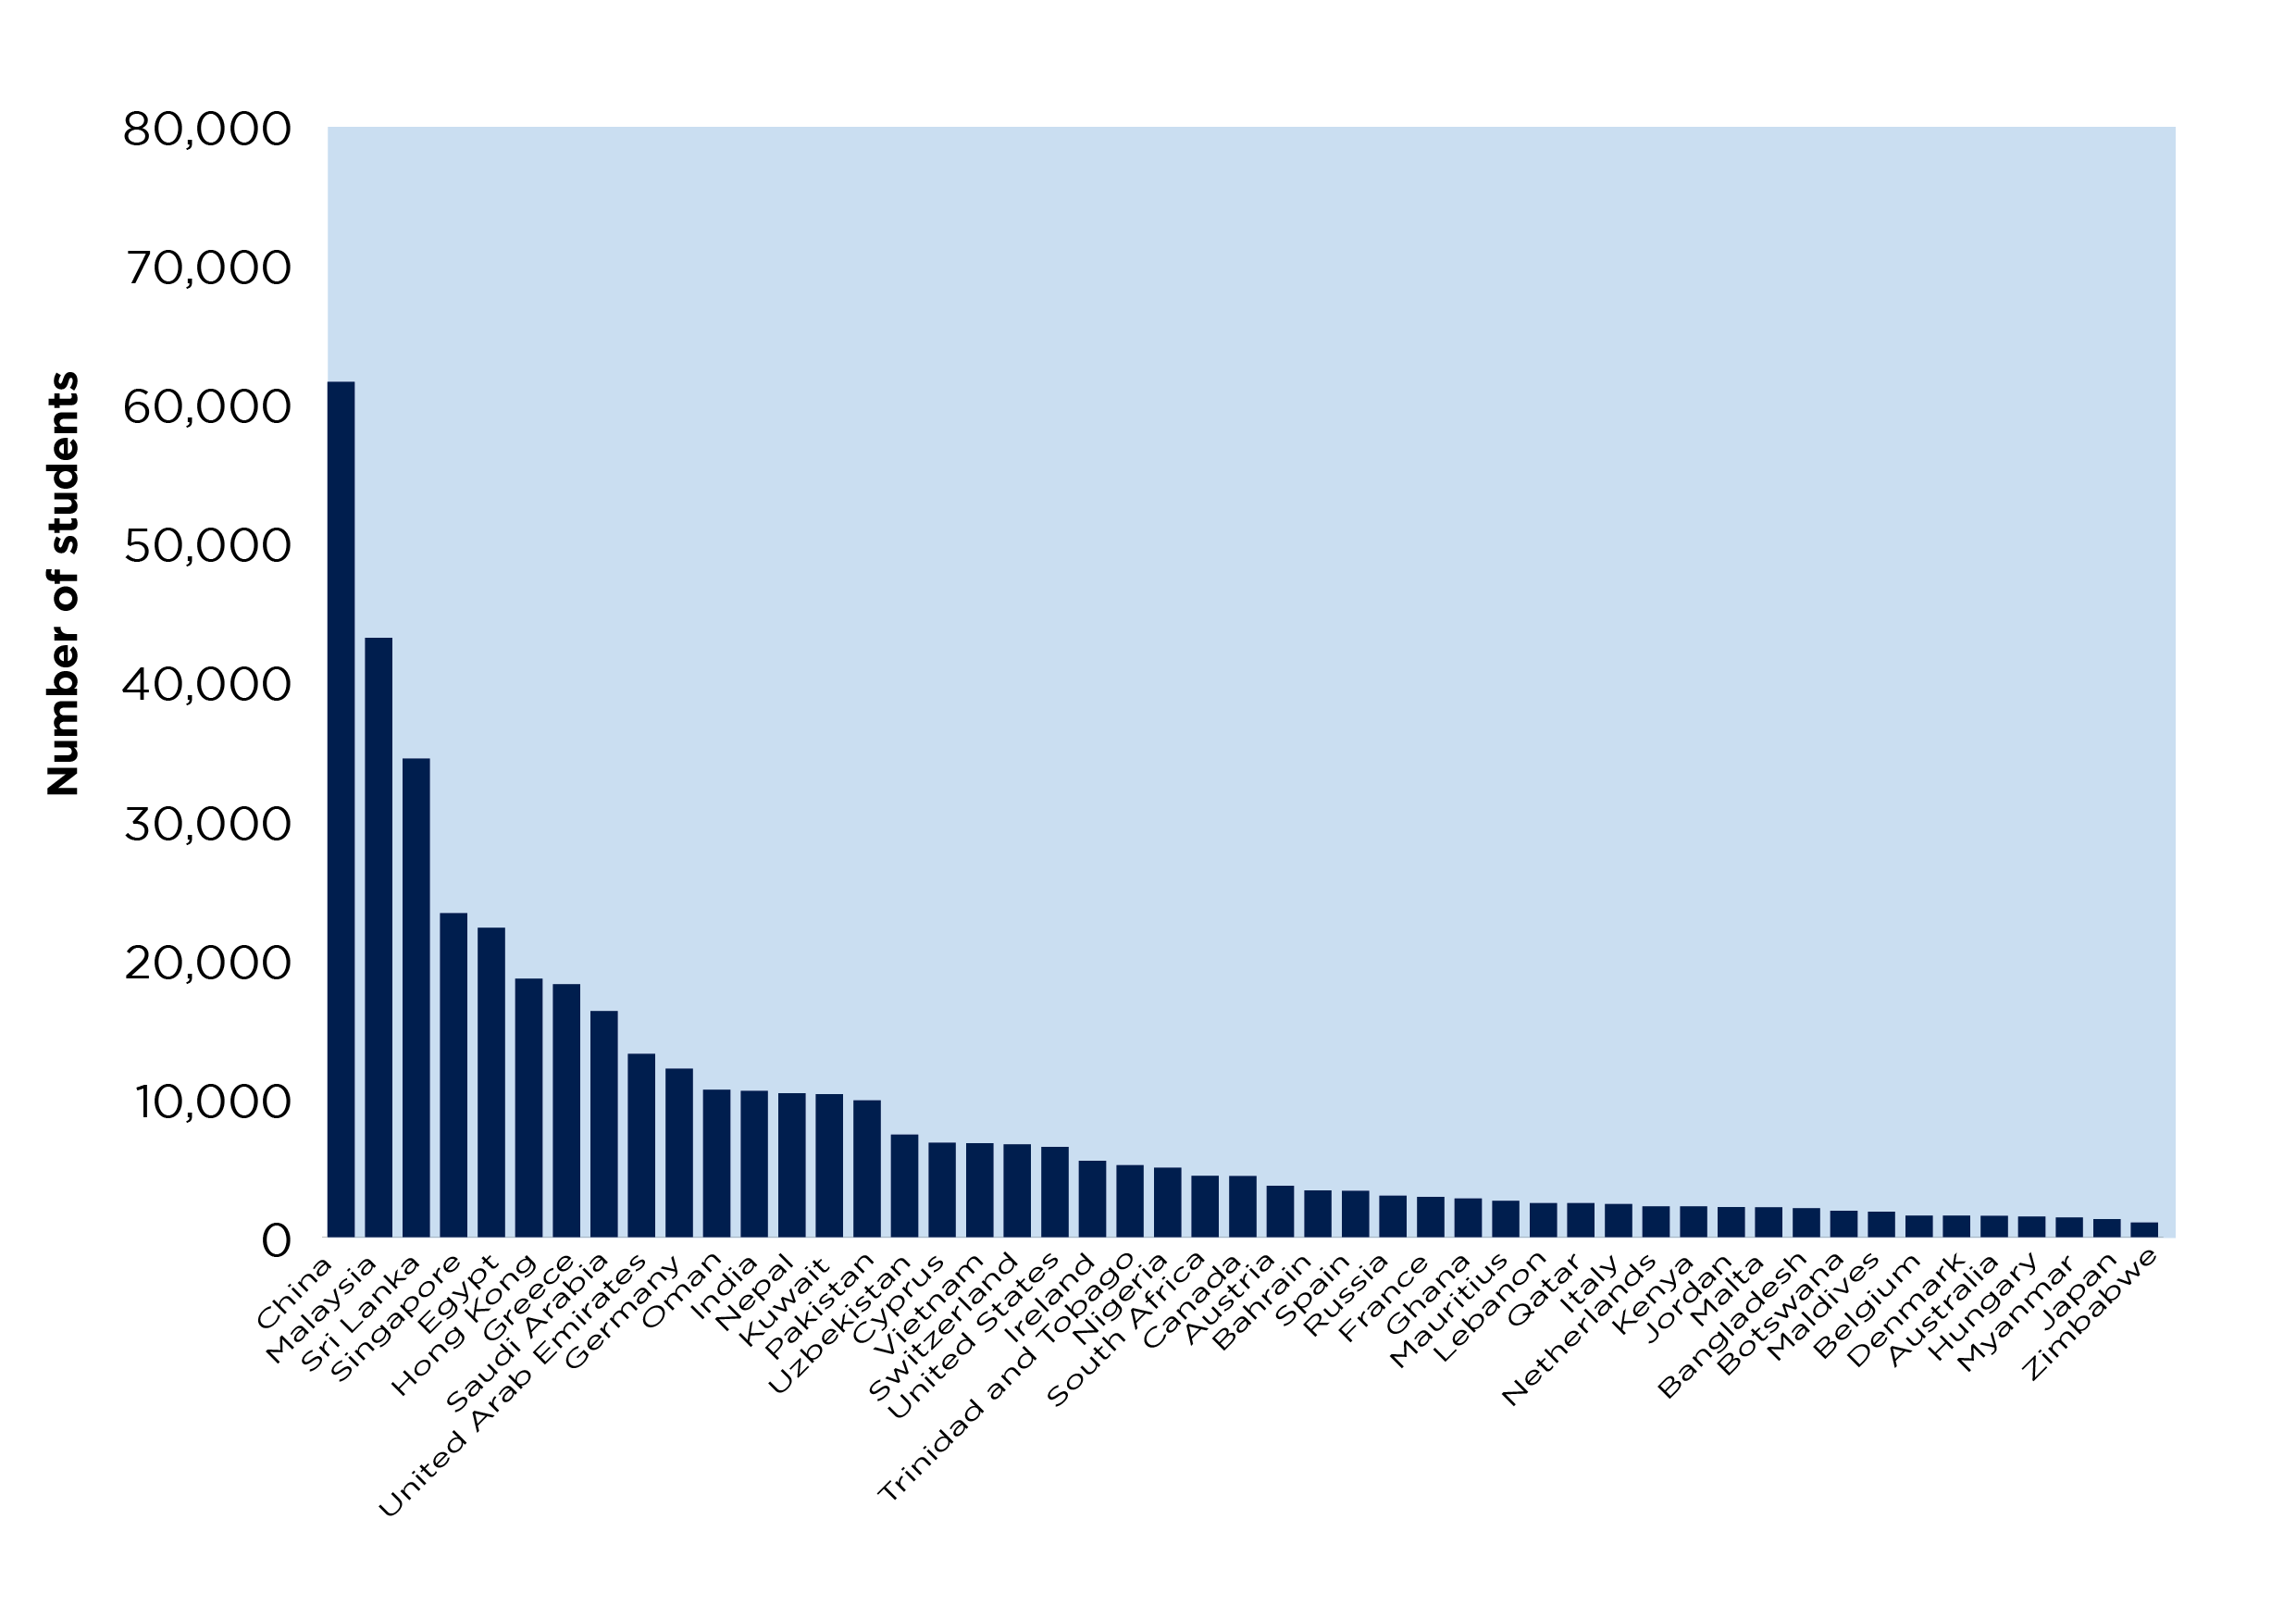 Figure 2 is a bar chart showing populations of TNE students in 52 countries, ranging from China with circa 61,200 students to Zimbabwe with a little over 1,000. Further details are given in the text.